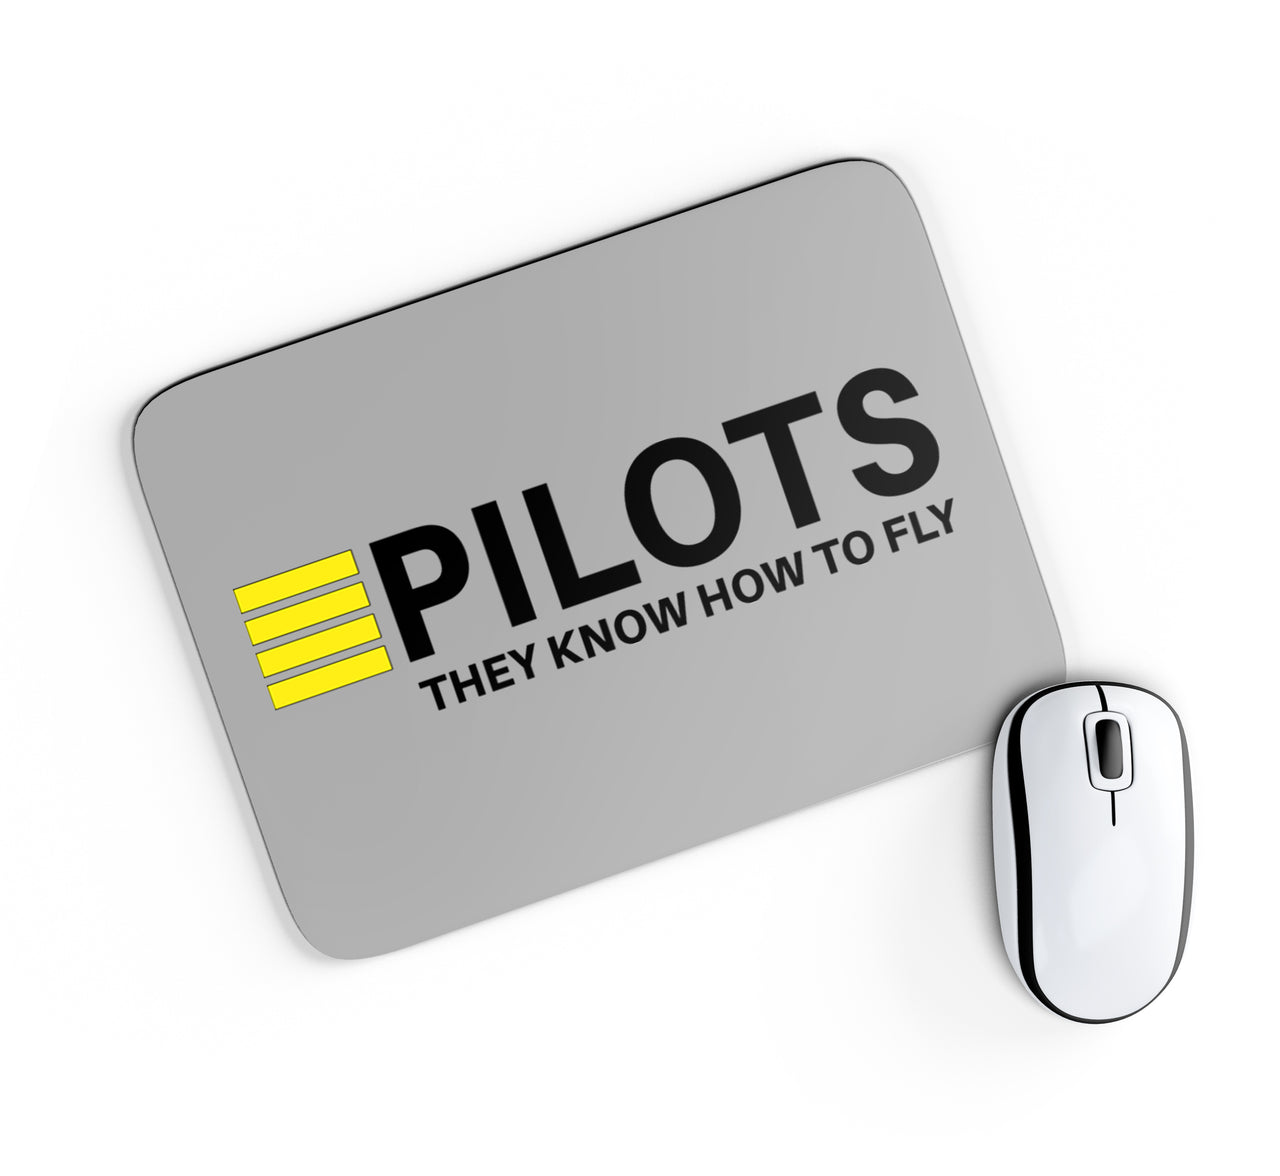 Pilots They Know How To Fly Designed Mouse Pads